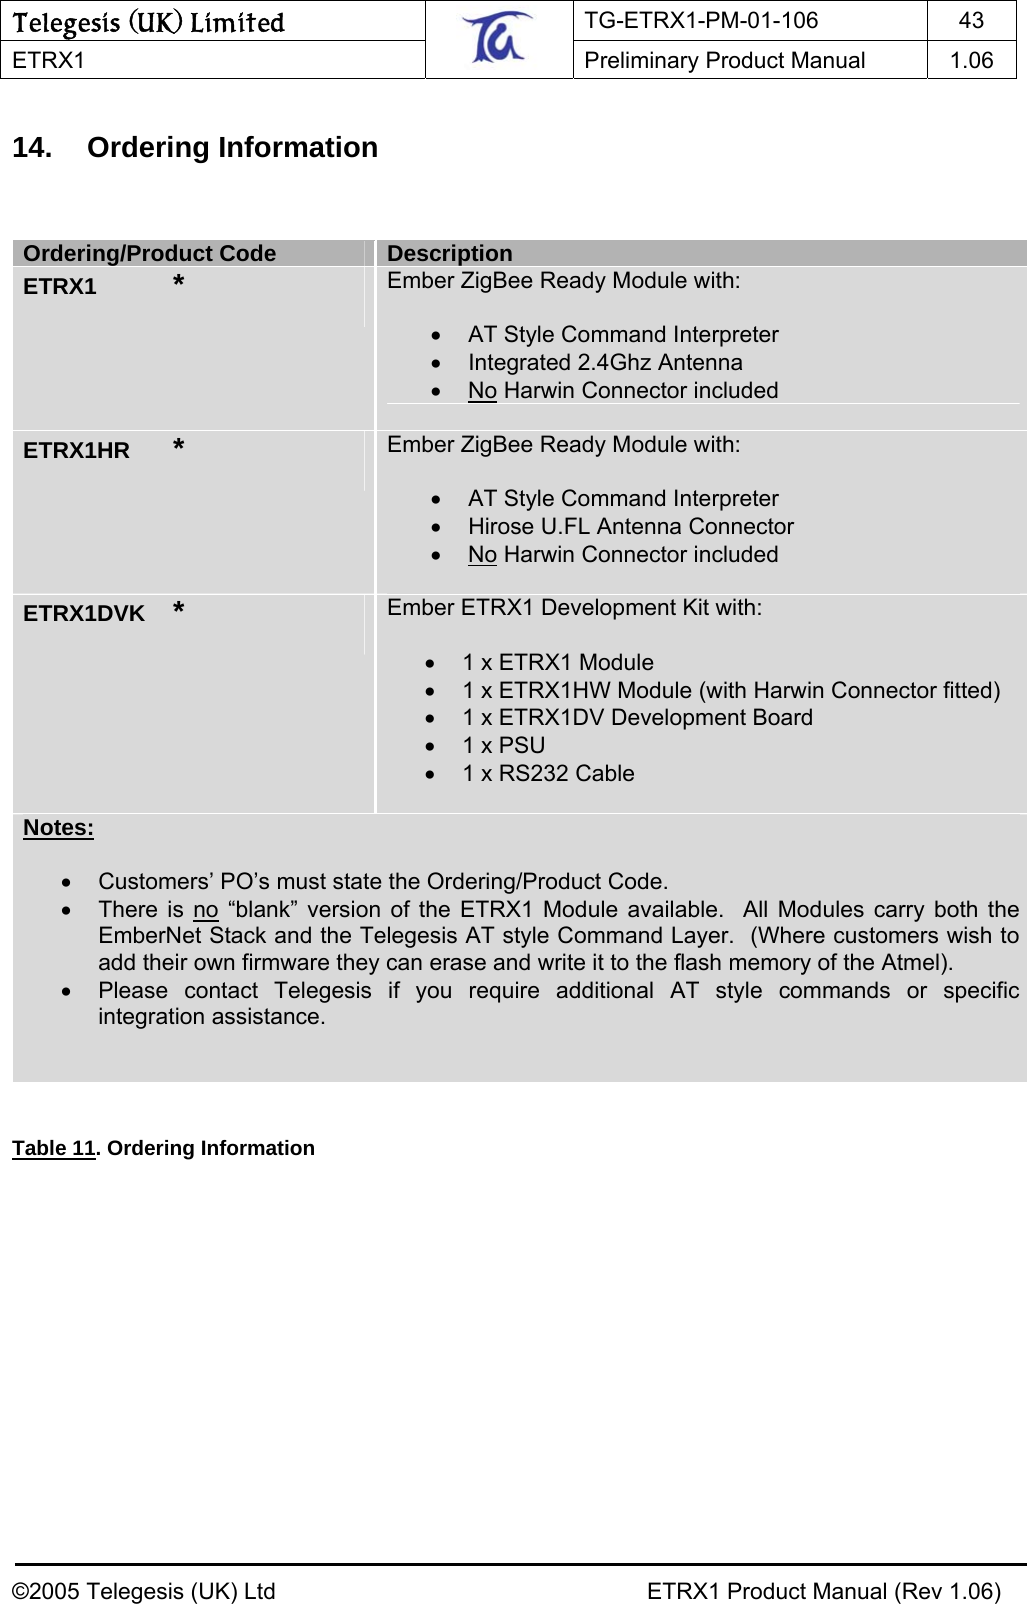 Telegesis (UK) Limited TG-ETRX1-PM-01-106 43  ETRX1    Preliminary Product Manual  1.06   14. Ordering Information    Ordering/Product Code  Description ETRX1   *  Ember ZigBee Ready Module with:  •  AT Style Command Interpreter  •  Integrated 2.4Ghz Antenna  • No Harwin Connector included  ETRX1HR  *  Ember ZigBee Ready Module with:  •  AT Style Command Interpreter •  Hirose U.FL Antenna Connector • No Harwin Connector included  ETRX1DVK  *  Ember ETRX1 Development Kit with:  •  1 x ETRX1 Module •  1 x ETRX1HW Module (with Harwin Connector fitted) •  1 x ETRX1DV Development Board •  1 x PSU •  1 x RS232 Cable  Notes:  •  Customers’ PO’s must state the Ordering/Product Code. • There is no “blank” version of the ETRX1 Module available.  All Modules carry both the EmberNet Stack and the Telegesis AT style Command Layer.  (Where customers wish to add their own firmware they can erase and write it to the flash memory of the Atmel). •  Please contact Telegesis if you require additional AT style commands or specific integration assistance.    Table 11. Ordering Information  ©2005 Telegesis (UK) Ltd    ETRX1 Product Manual (Rev 1.06) 